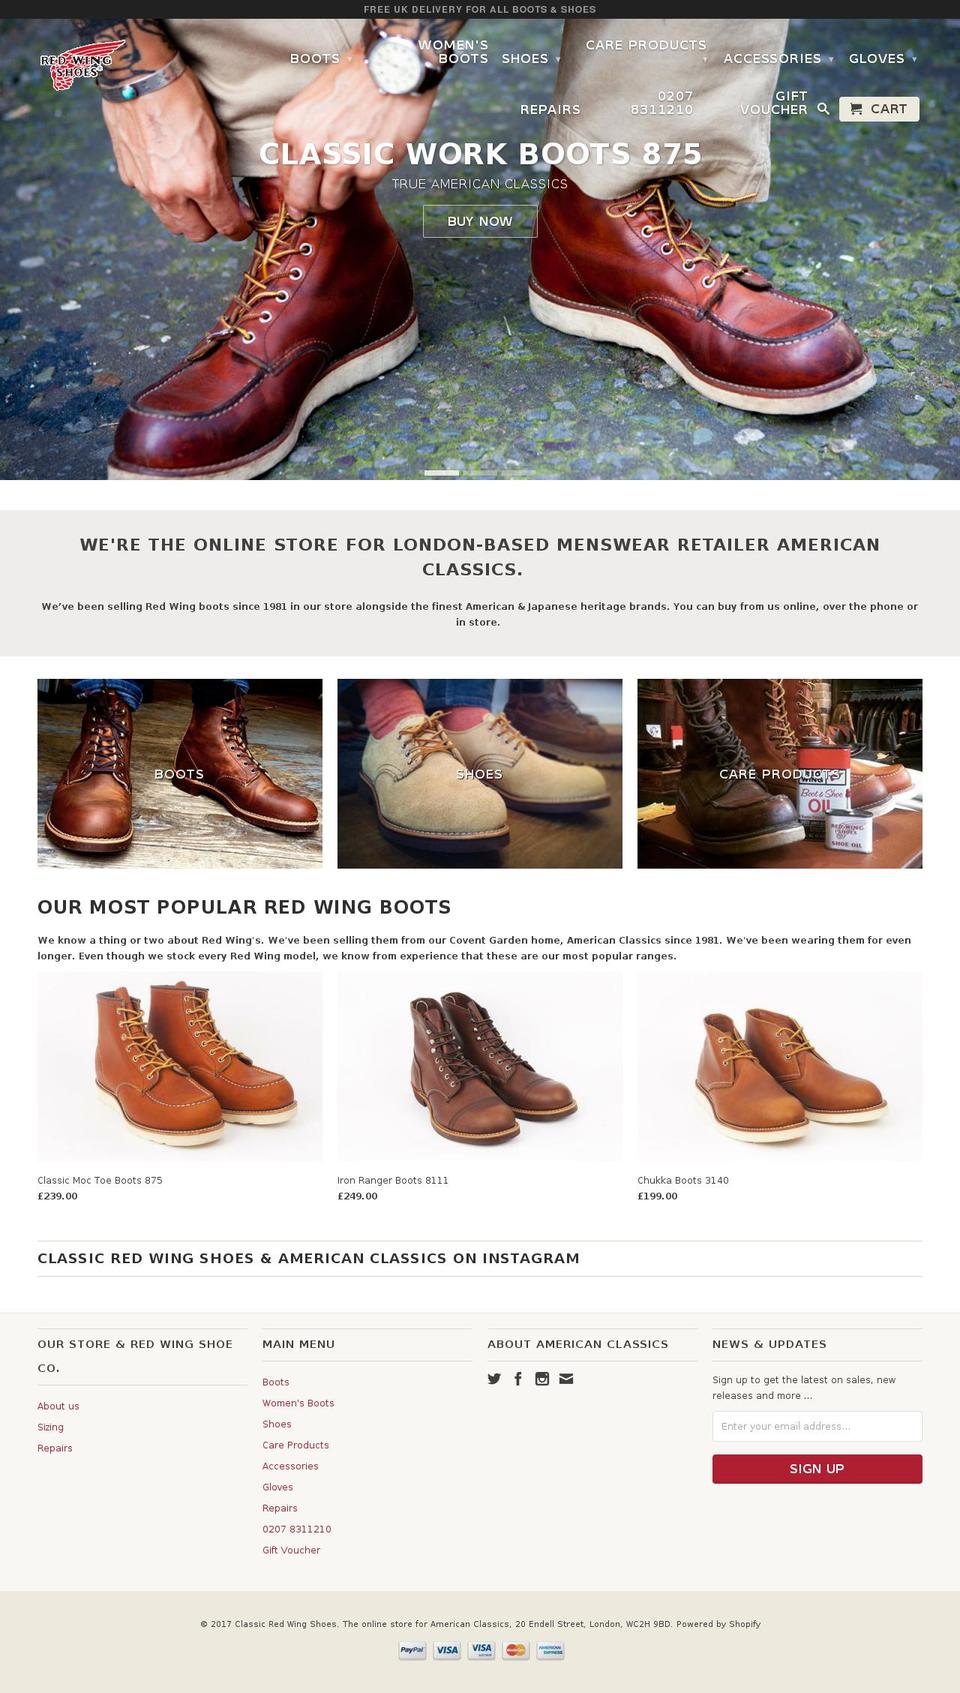 studio Shopify theme site example classicredwingshoes.co.uk